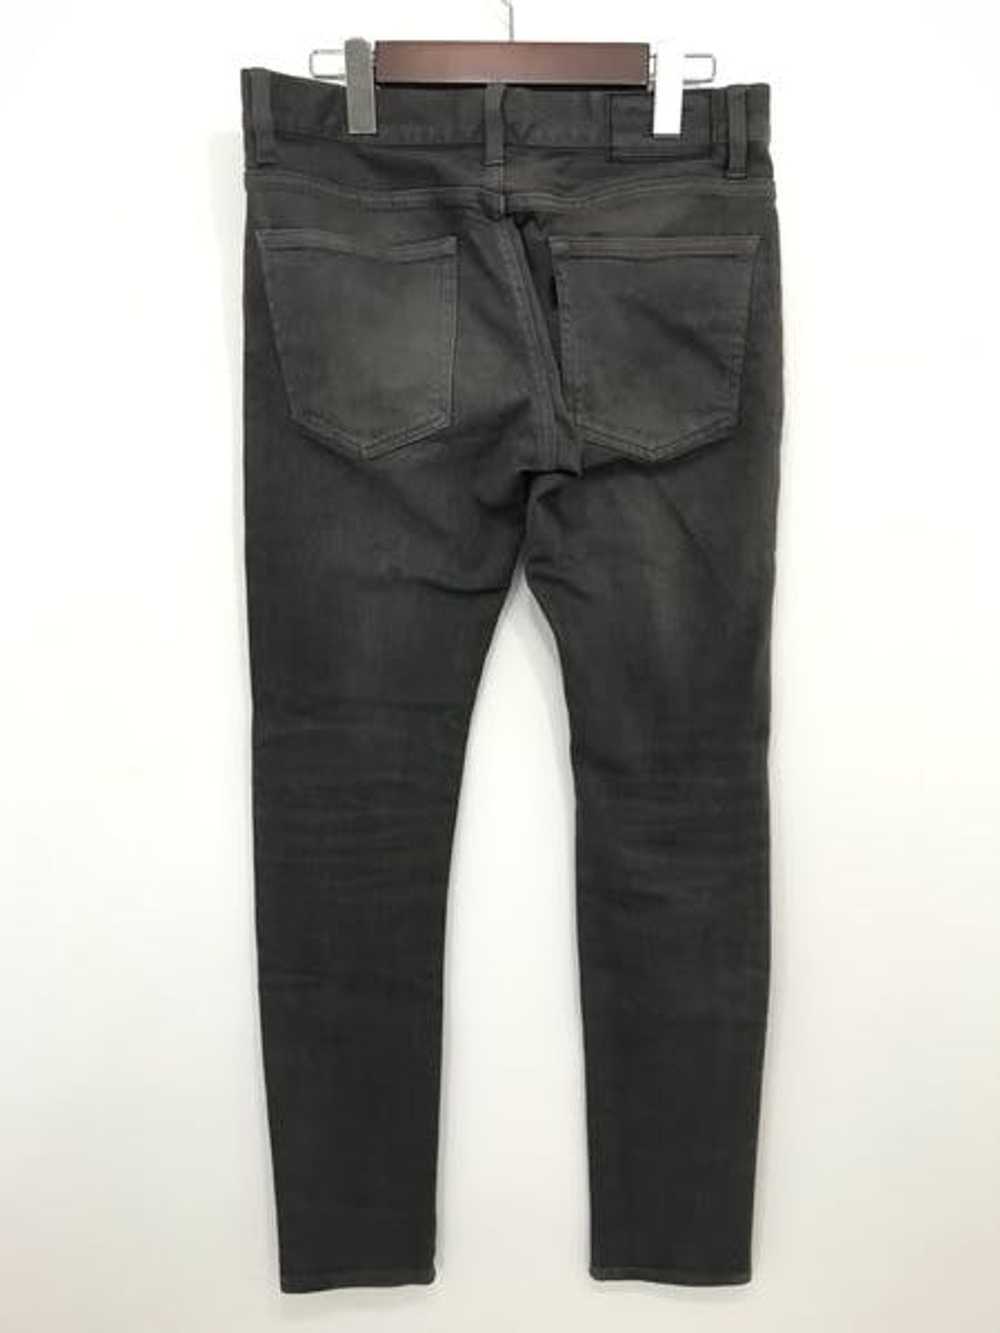 Undercover ripped knee skinny jeans - image 2